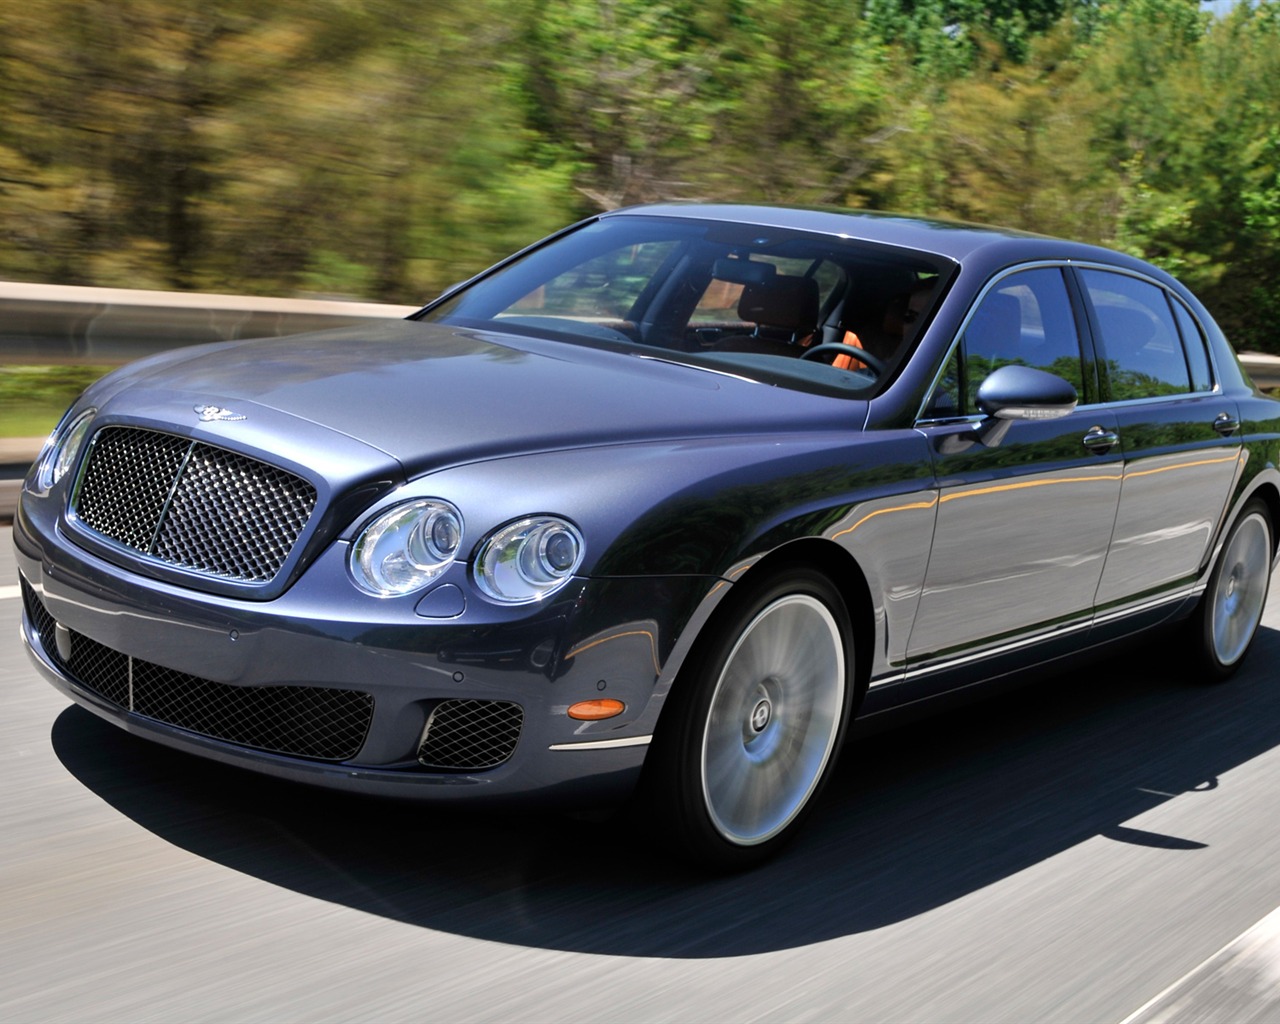 Bentley Continental Flying Spur Speed - 2008 賓利 #11 - 1280x1024